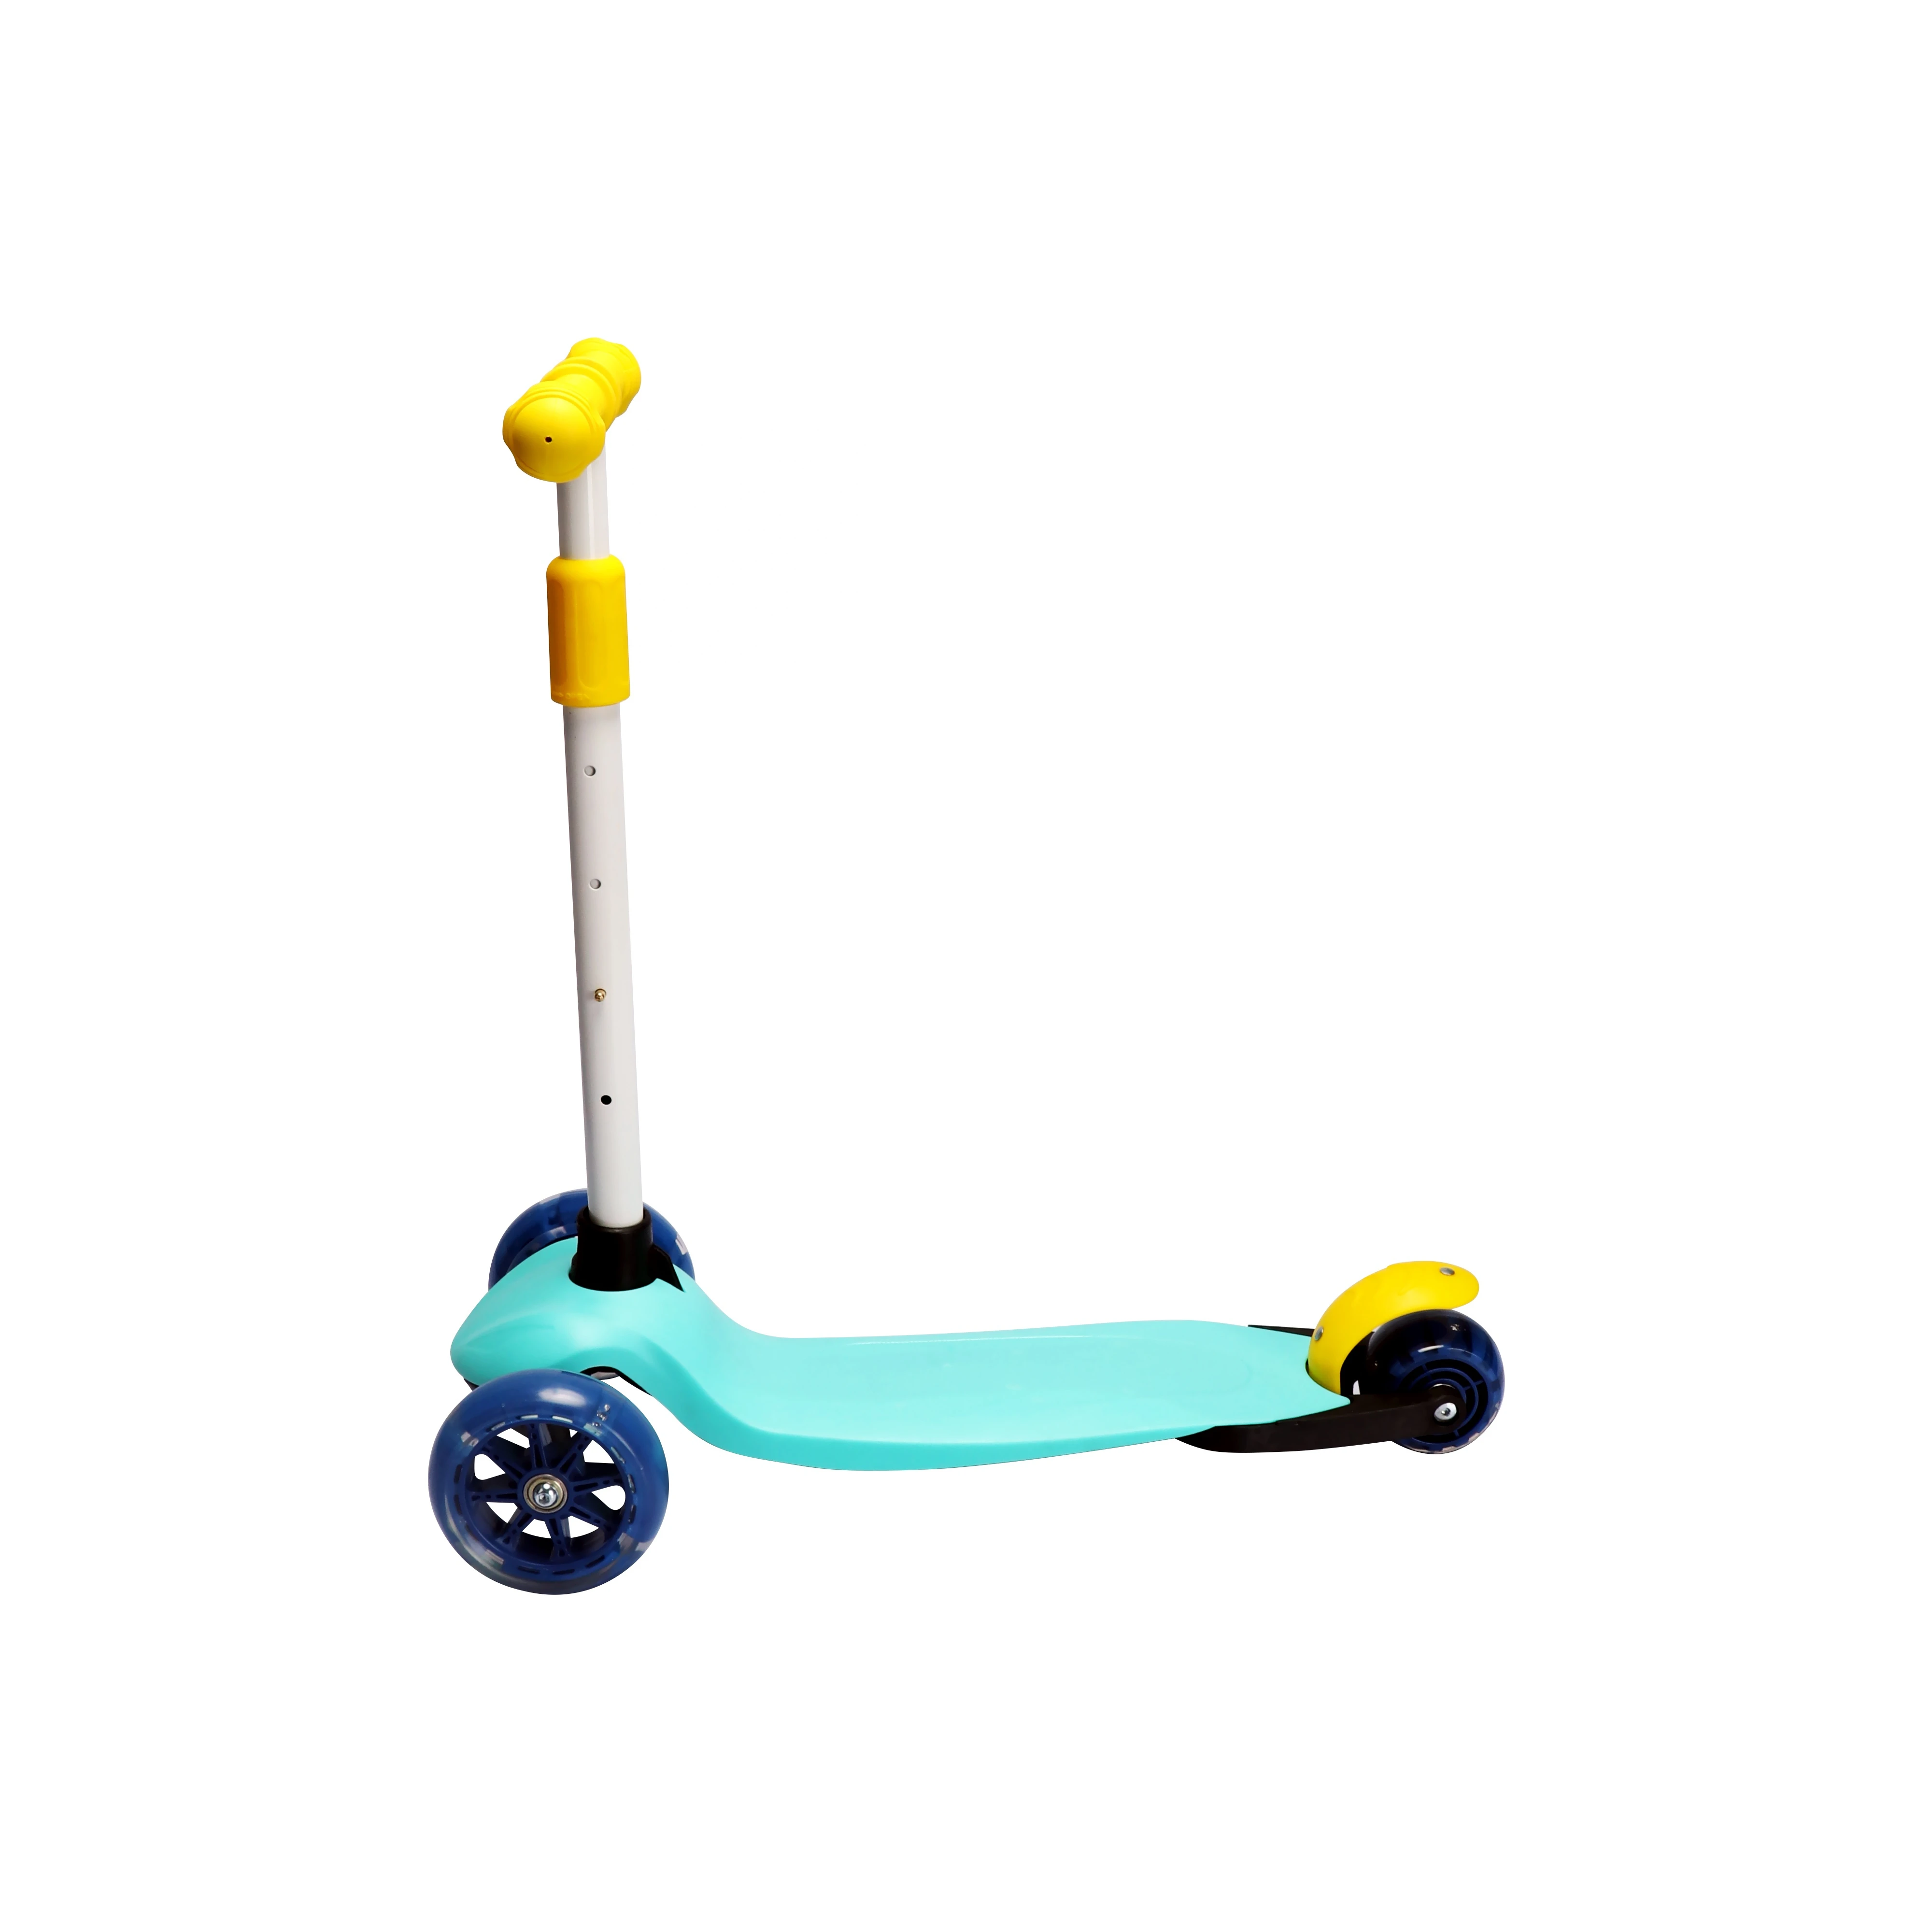 Low price guaranteed quality kickstand with rubber wheels scooter kids child